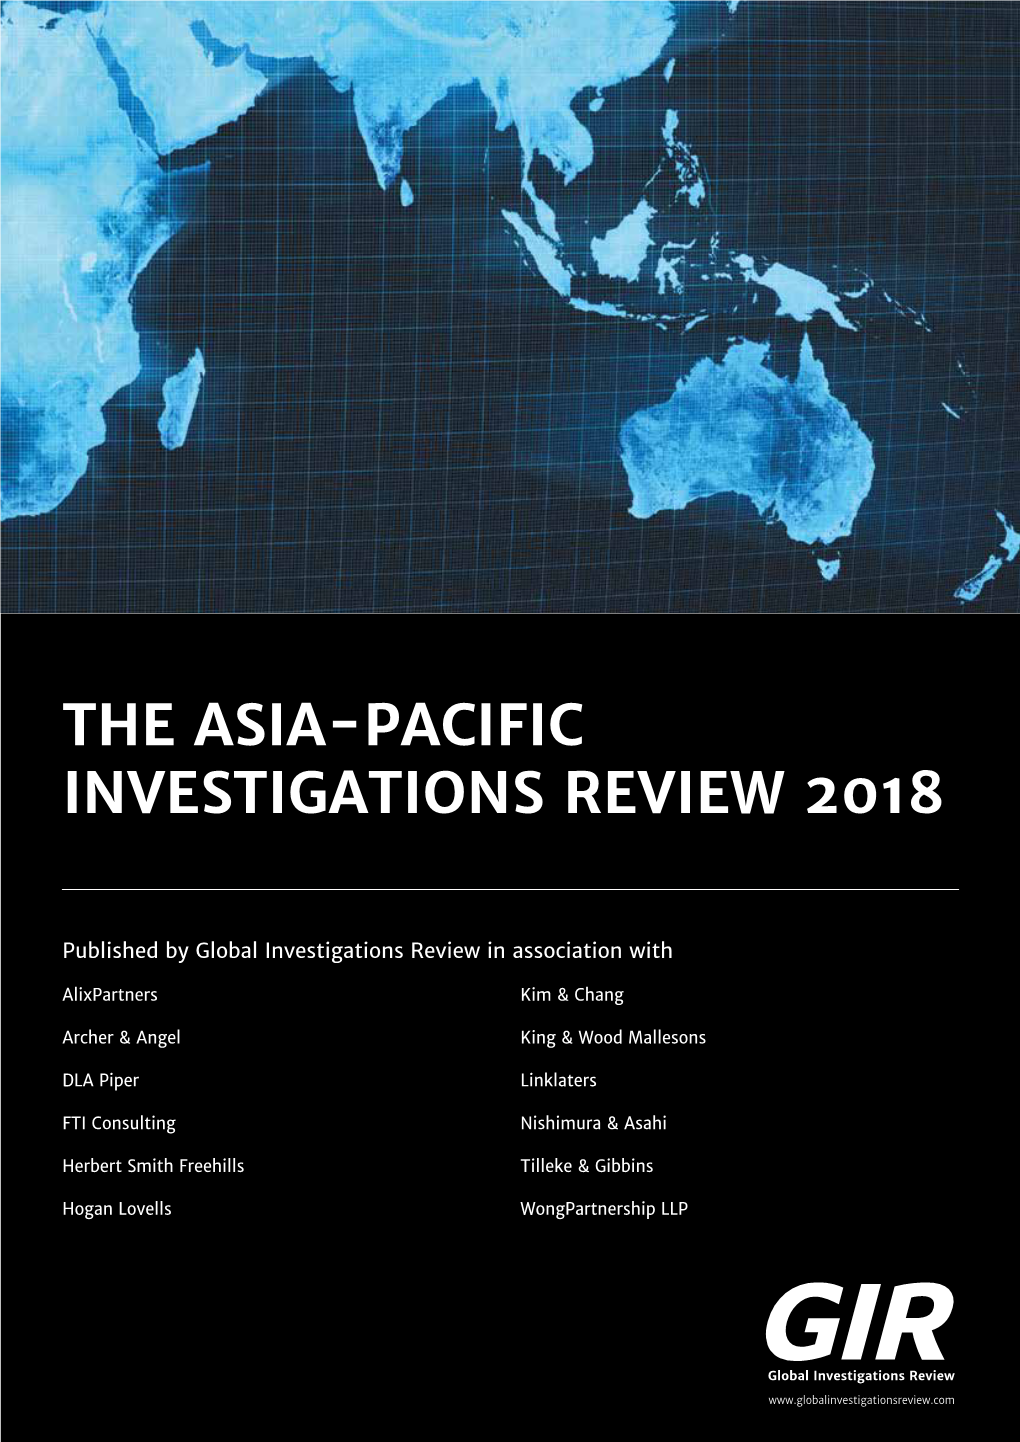 The Asia-Pacific Investigations Review 2018